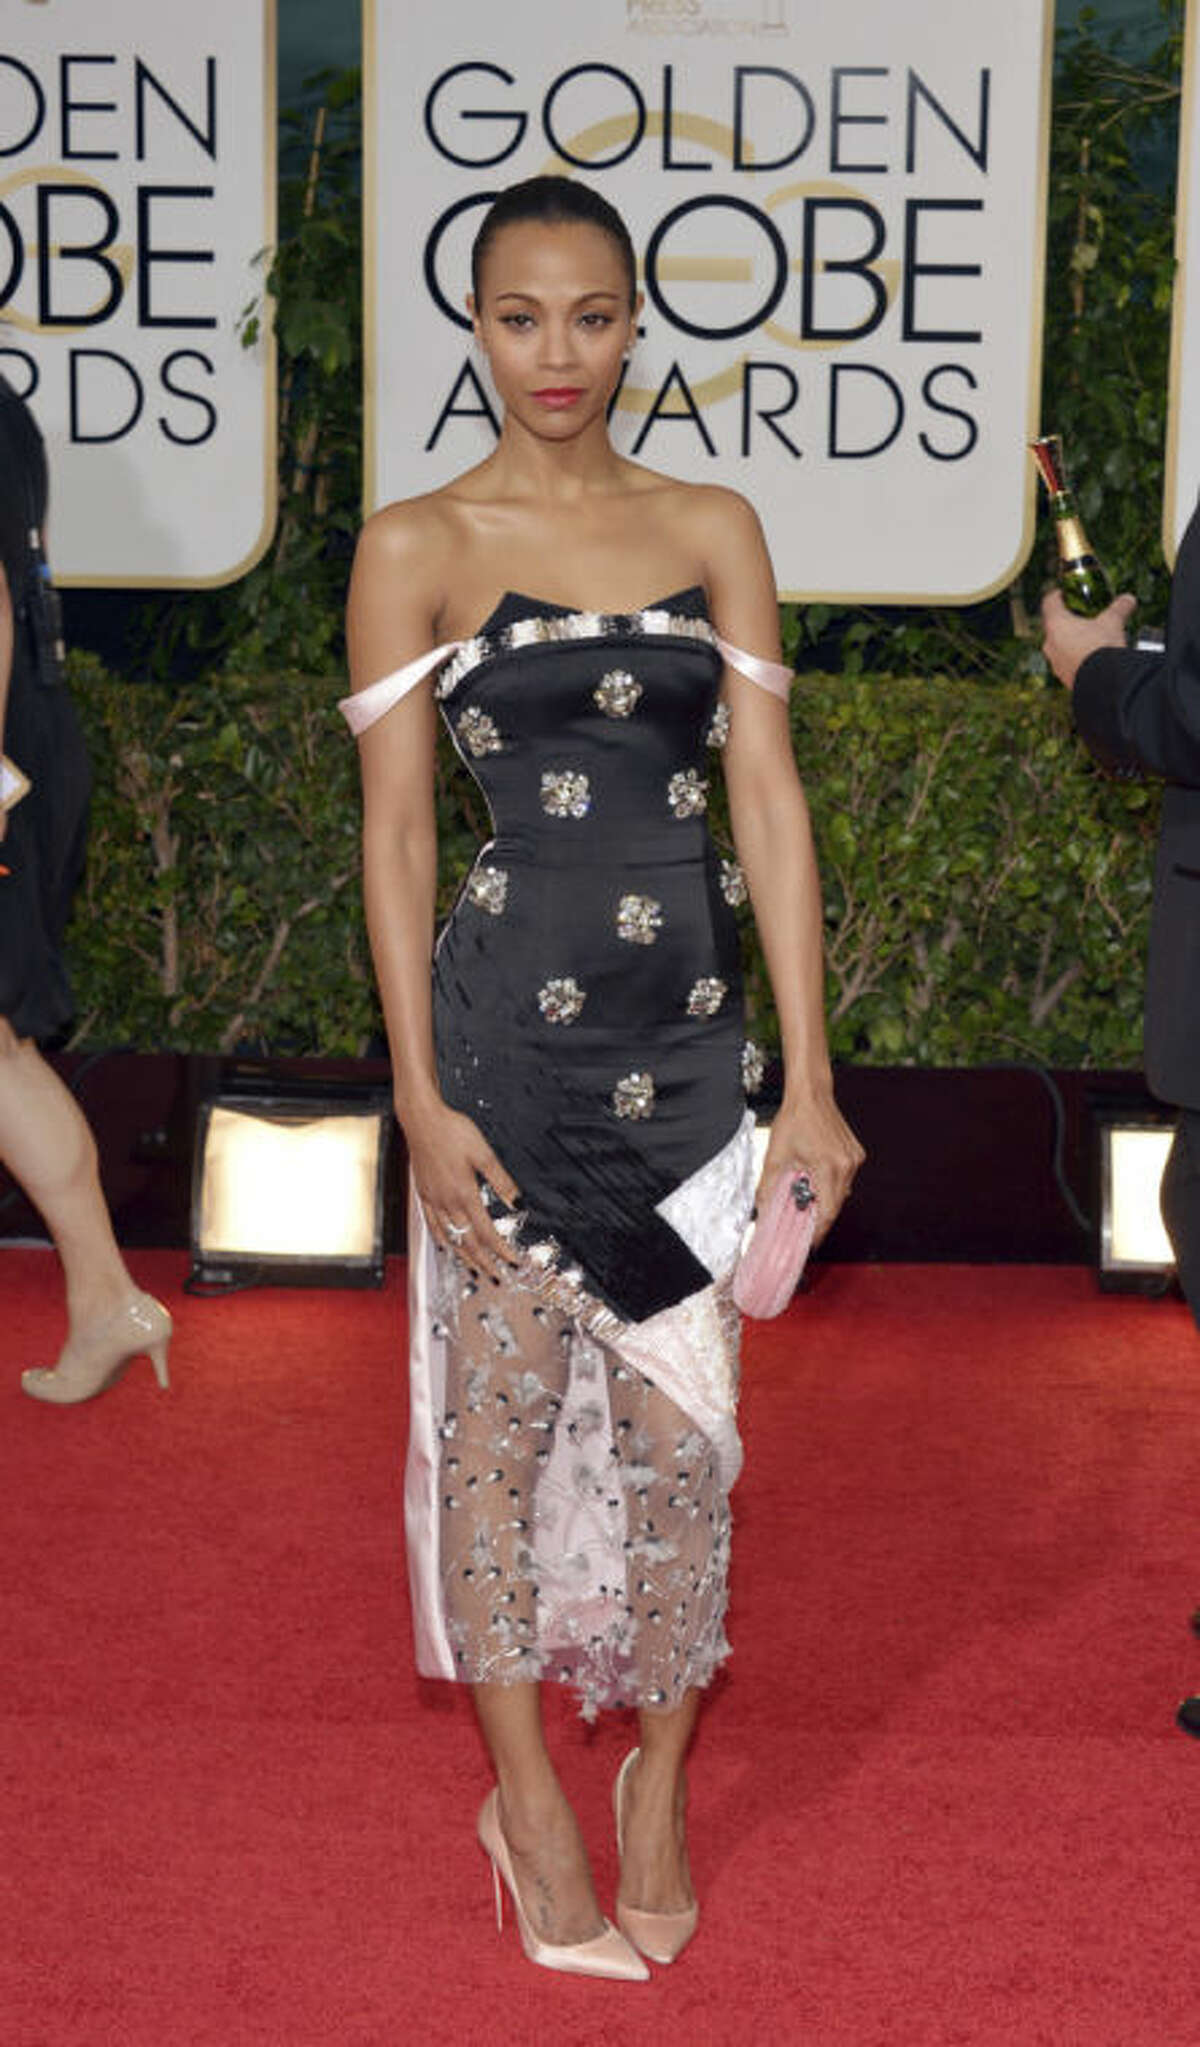 Zoe Saldana arrives at the 71st annual Golden Globe Awards at the Beverly Hilton Hotel on Sunday, Jan. 12, 2014, in Beverly Hills, Calif. (Photo by John Shearer/Invision/AP)